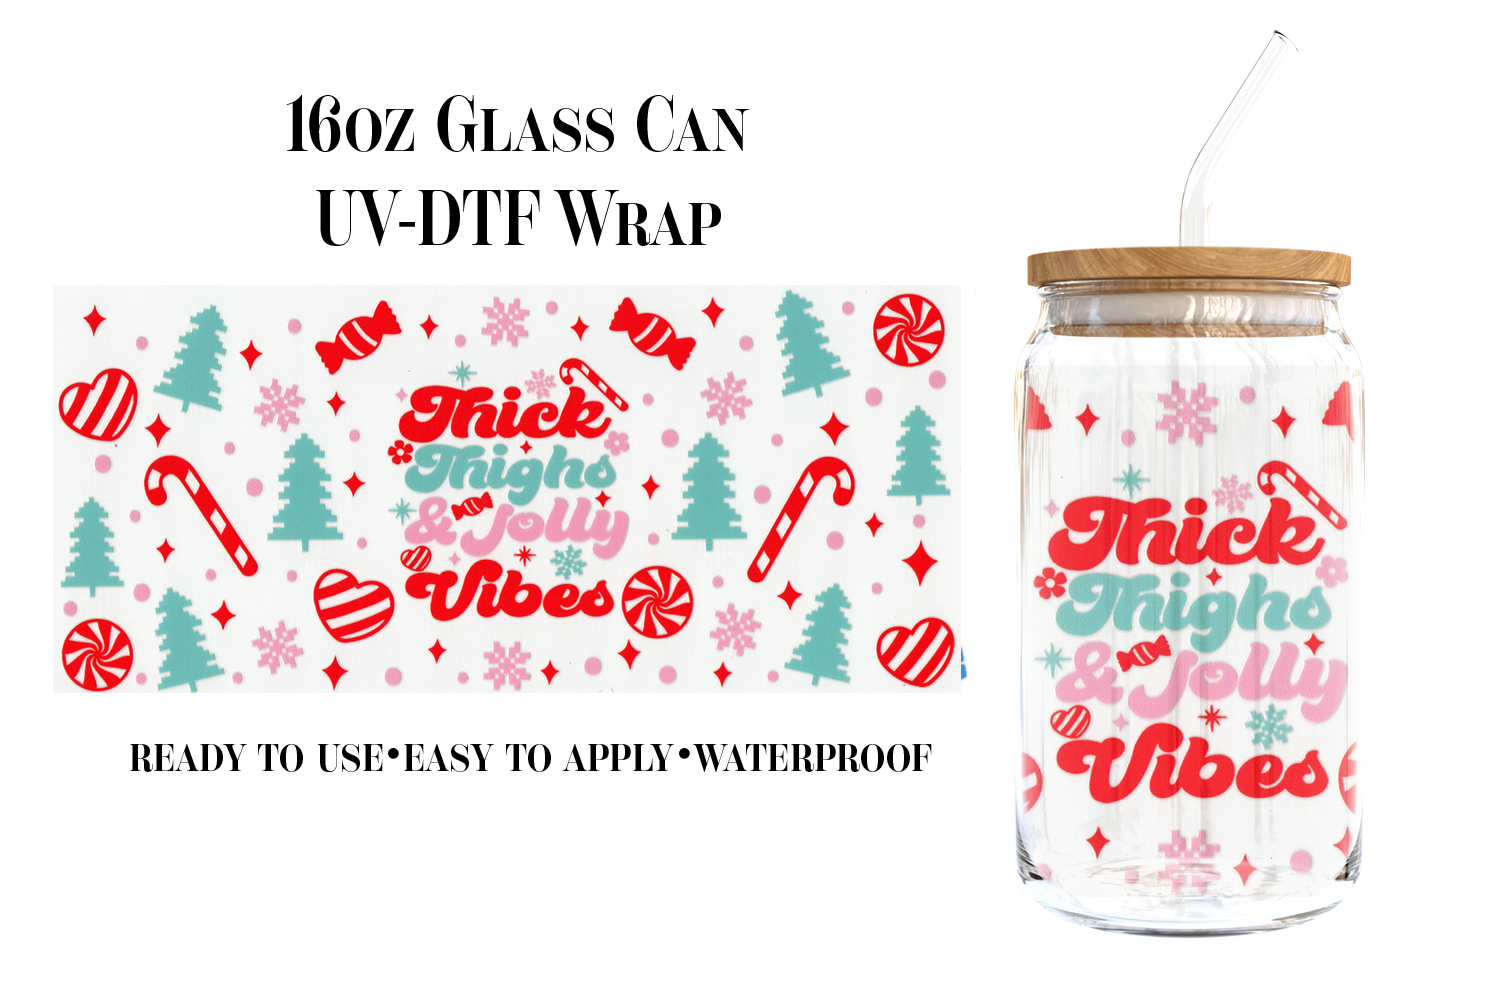 #152) Thick Thighs Jolly Vibes UVDTF 16oz Wrap